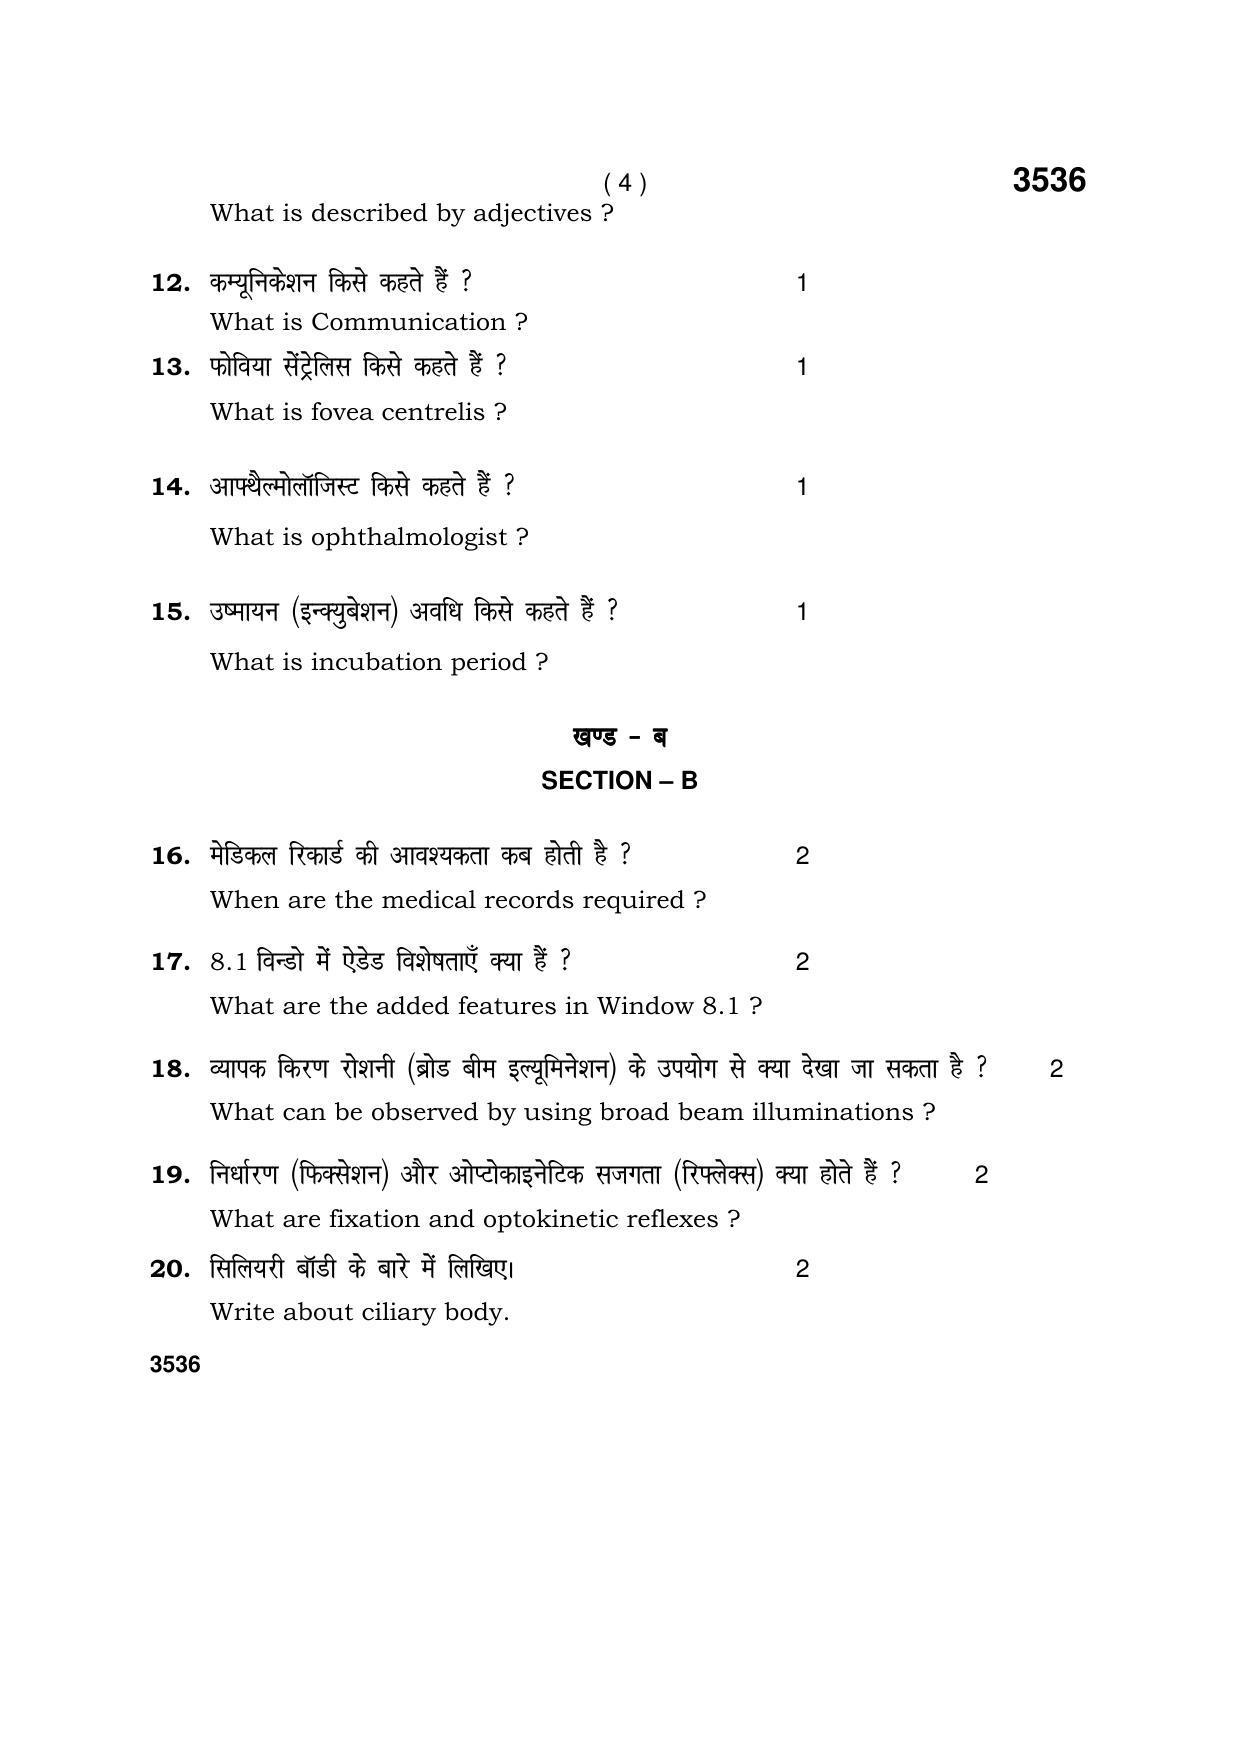 Haryana Board HBSE Class 10 Vision Technician 2018 Question Paper - Page 4